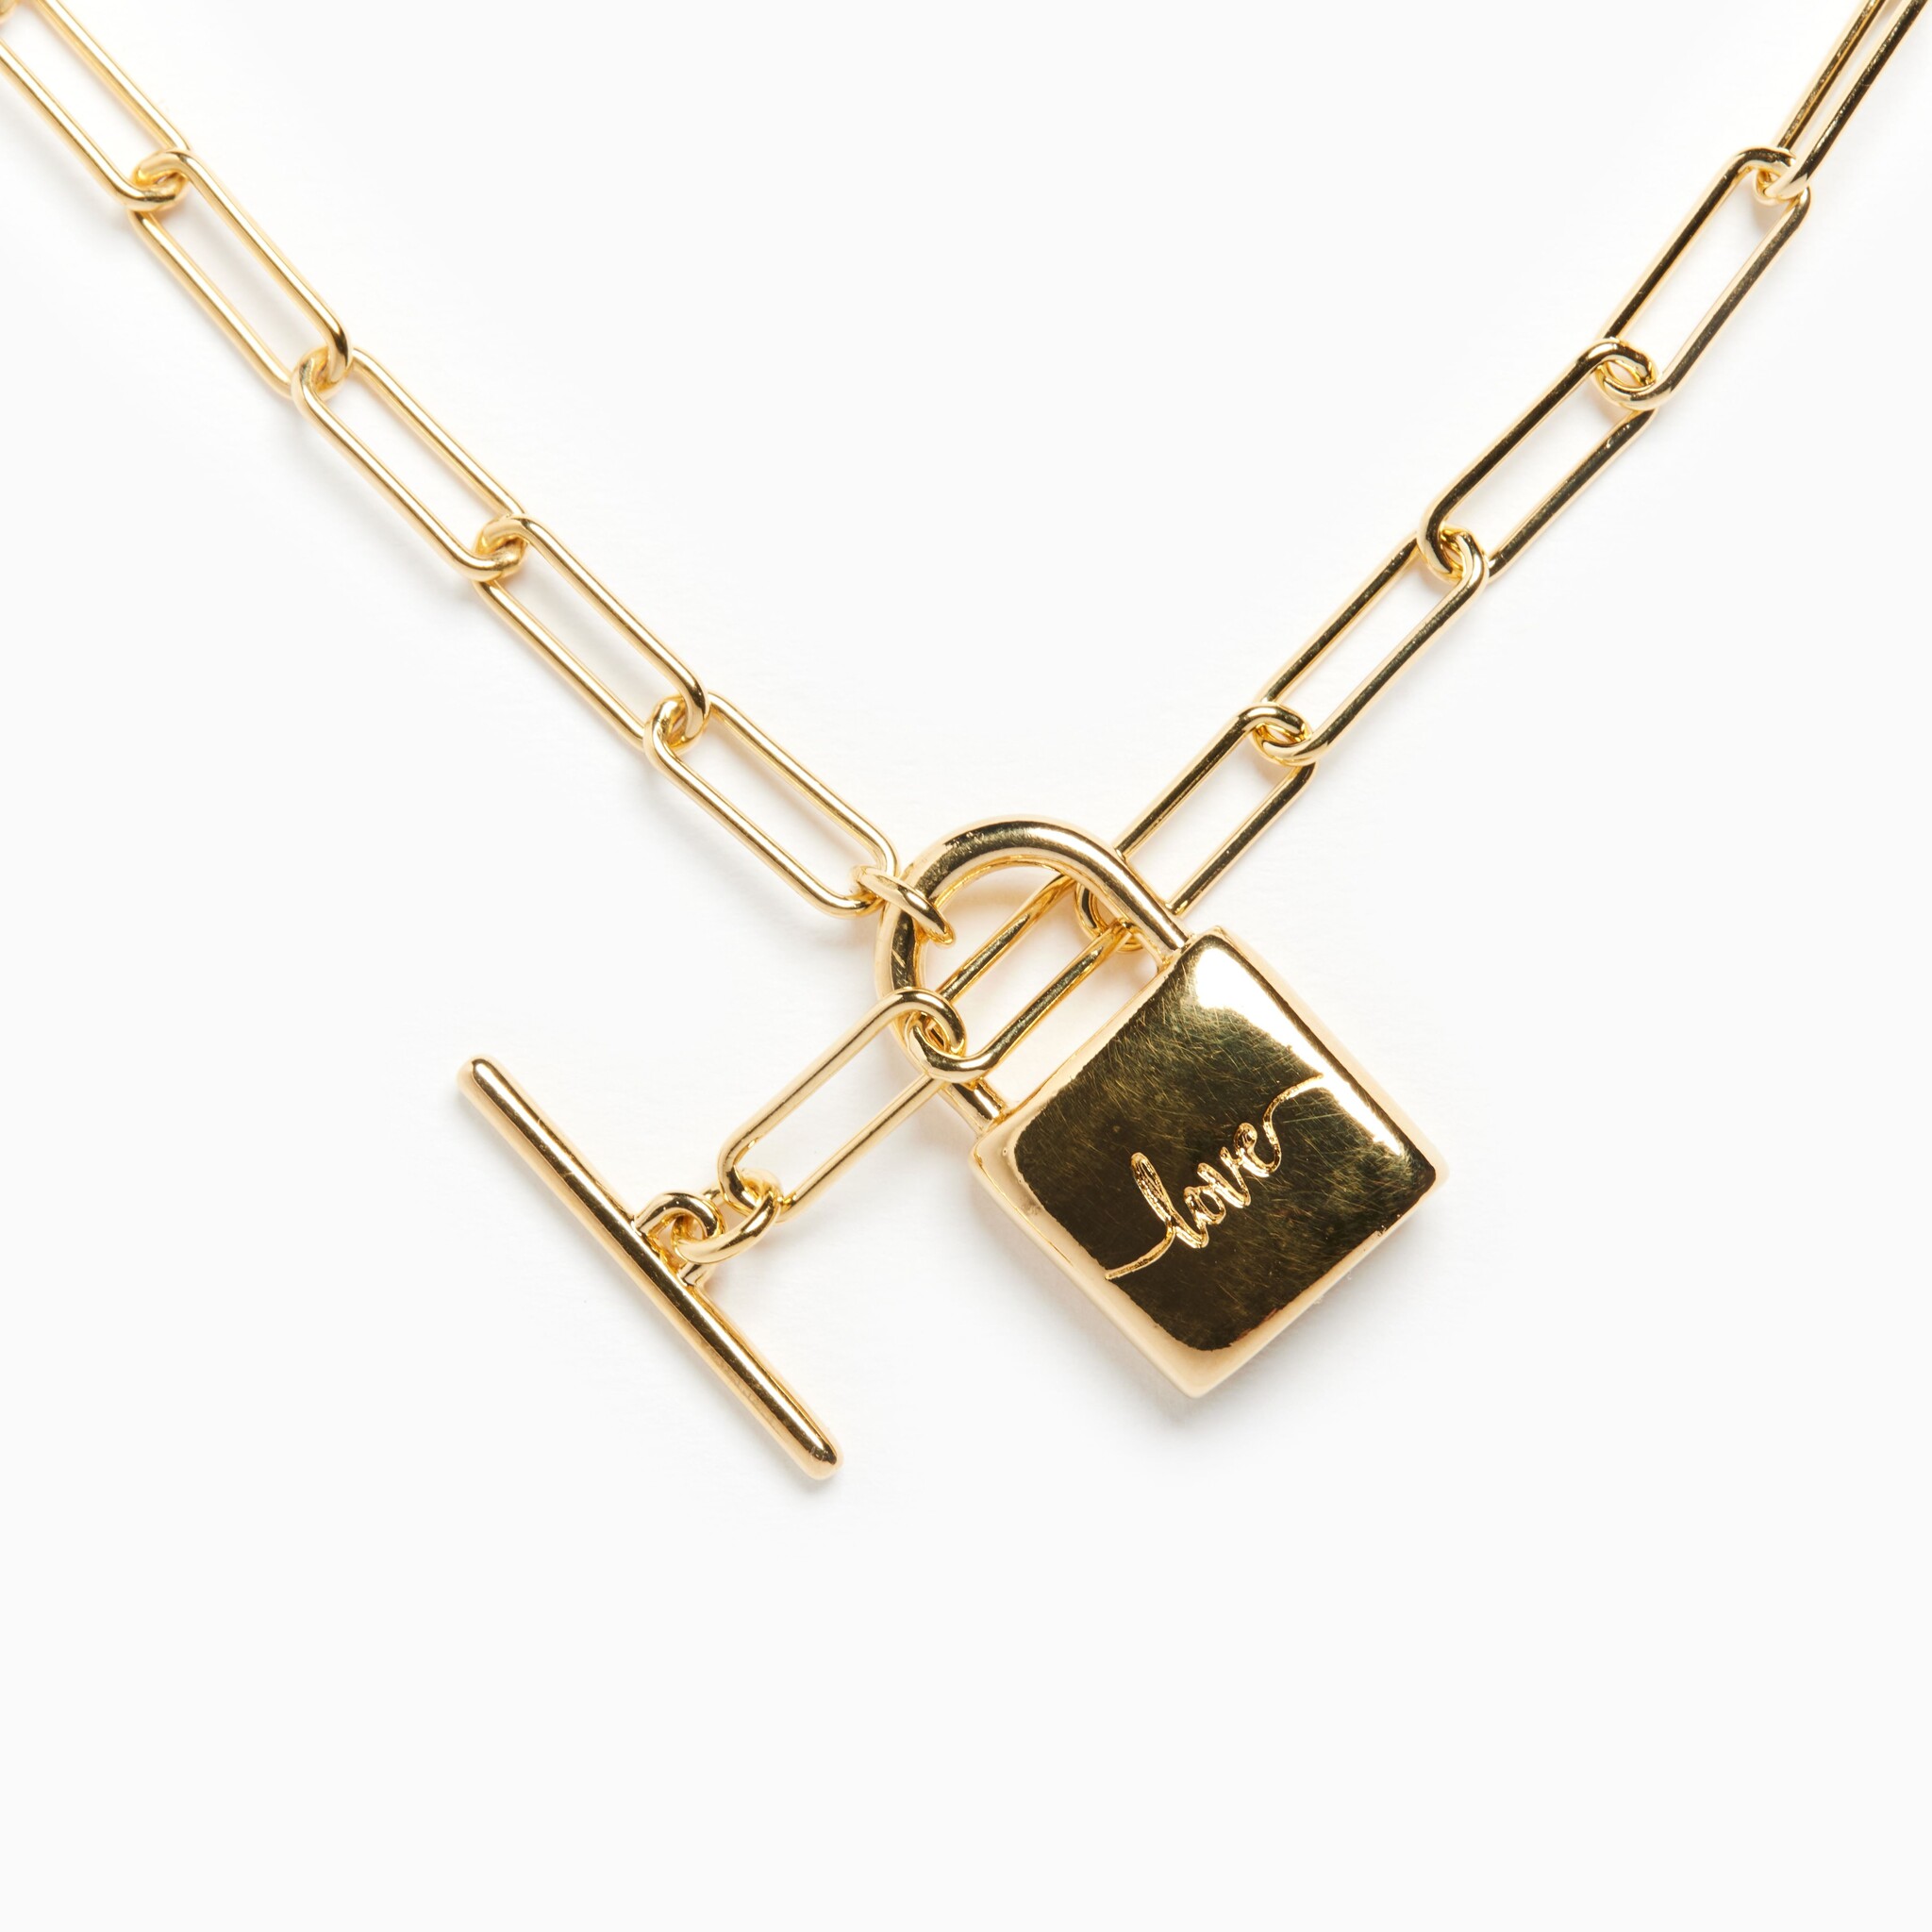 Beloved Lock Pendant Necklace w/ Ball Chain